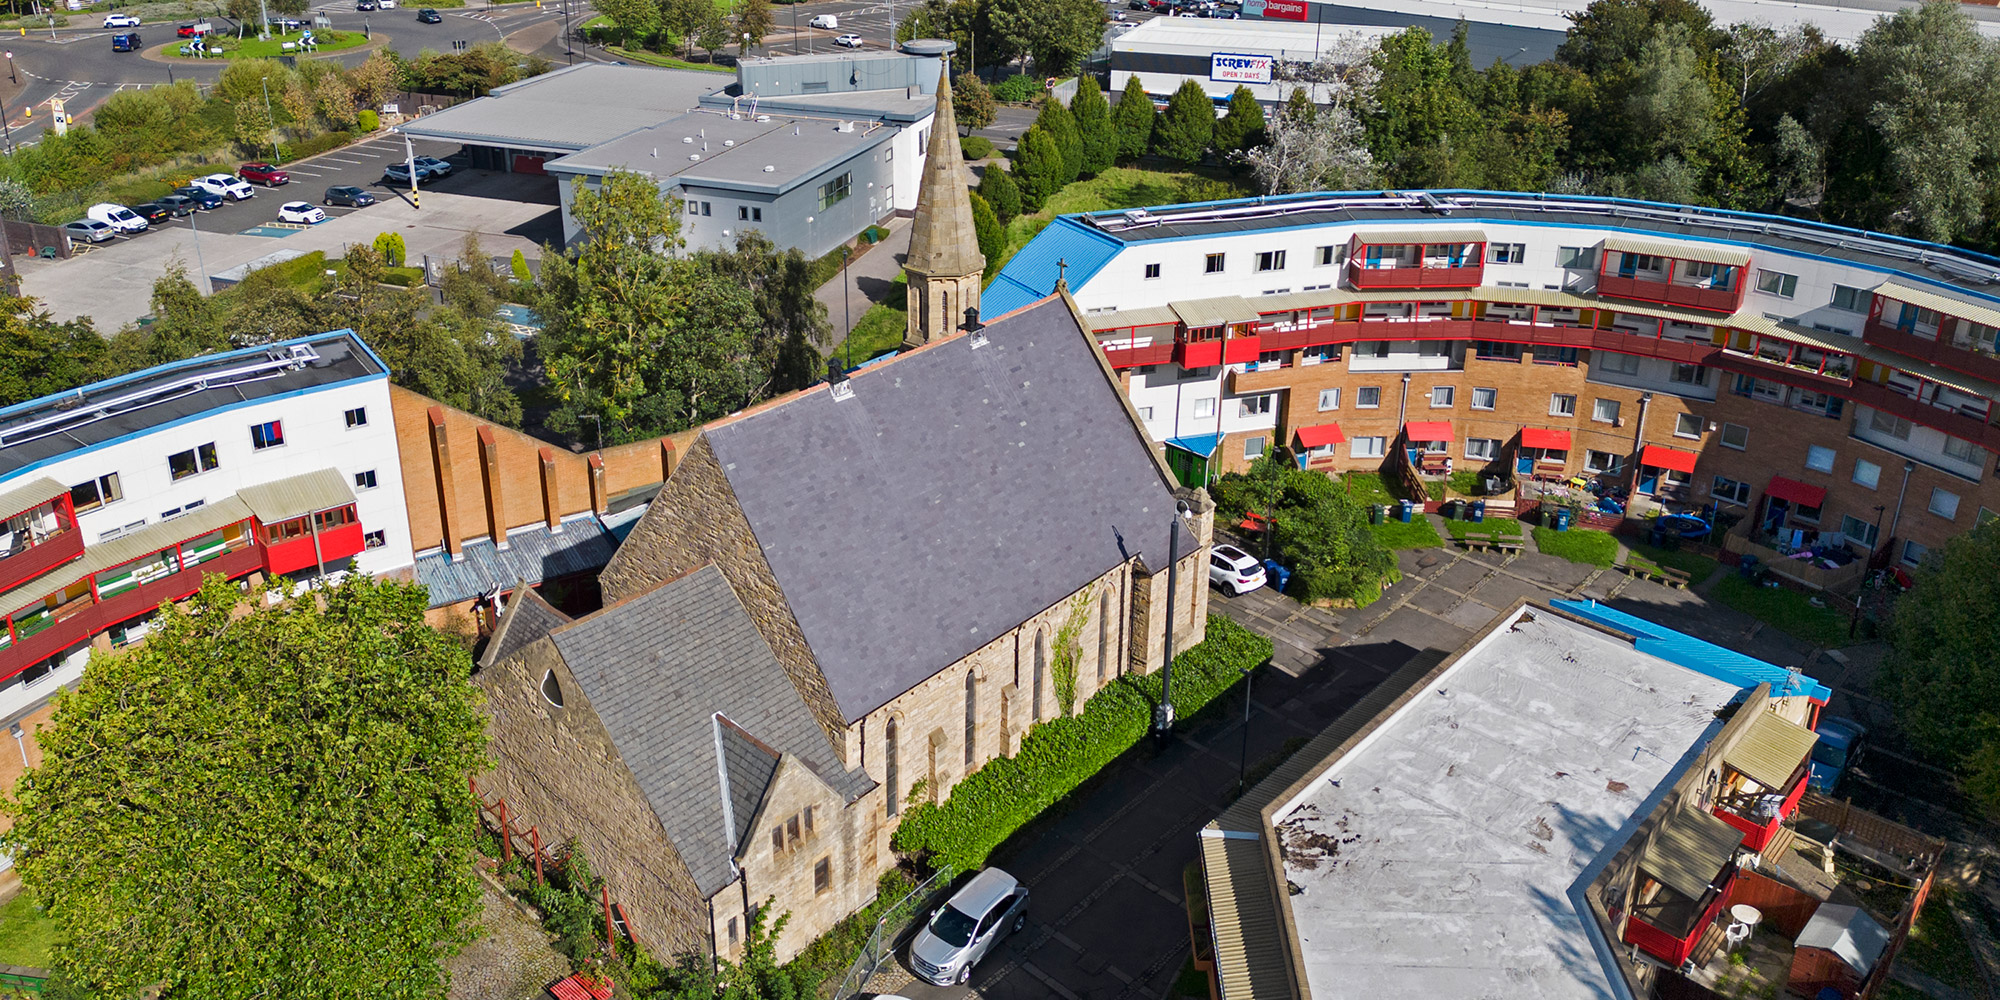 Exterior, drone image from west showing church, snaking estate buildings.